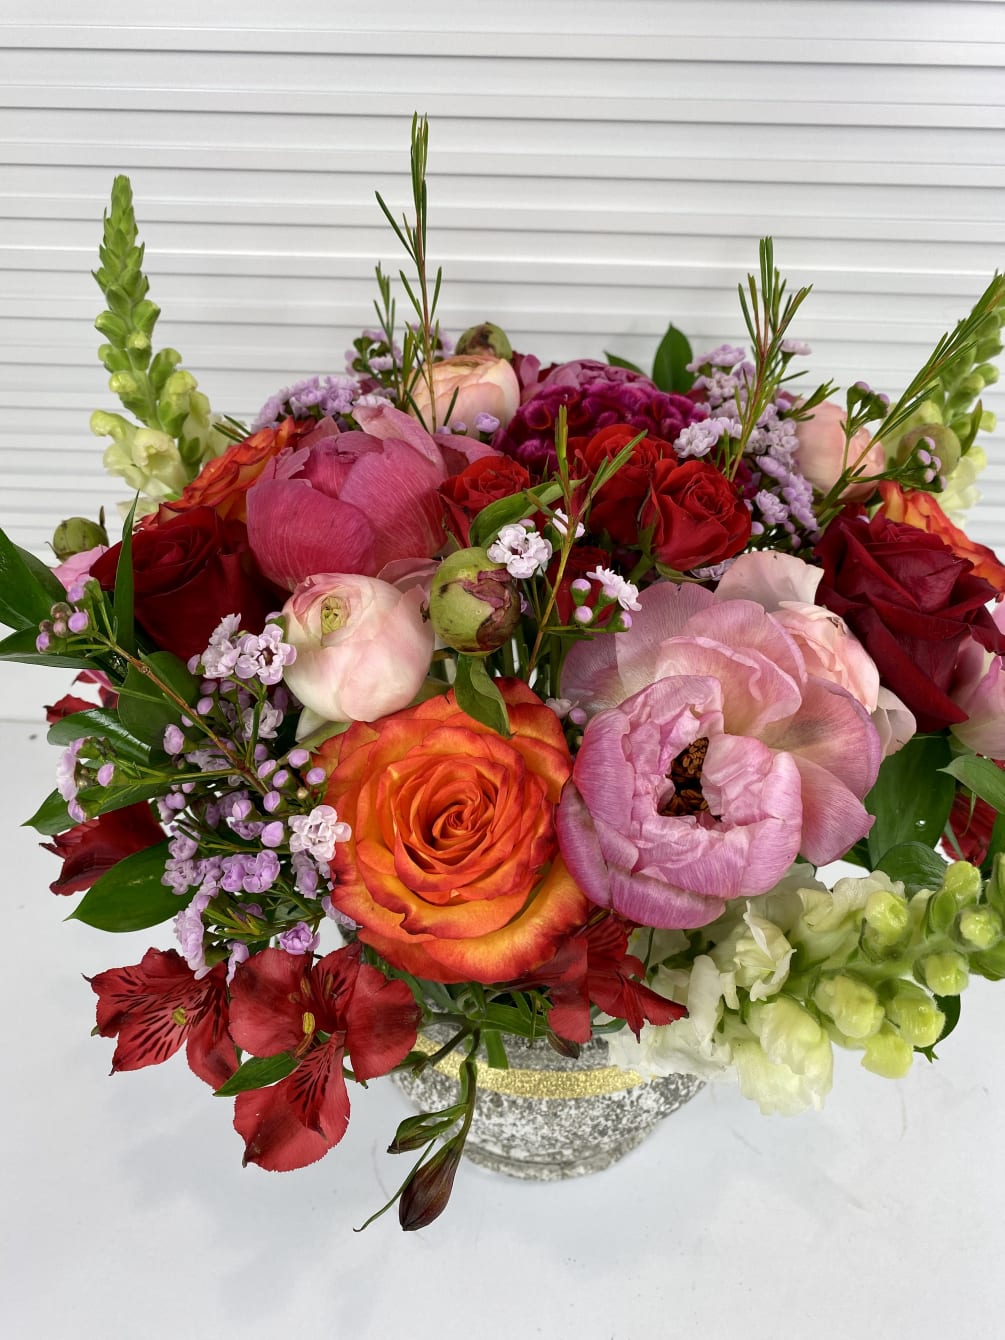 Seasonal Peonies or garden roses, Roses, Lisianthus, fillers and greenery in an